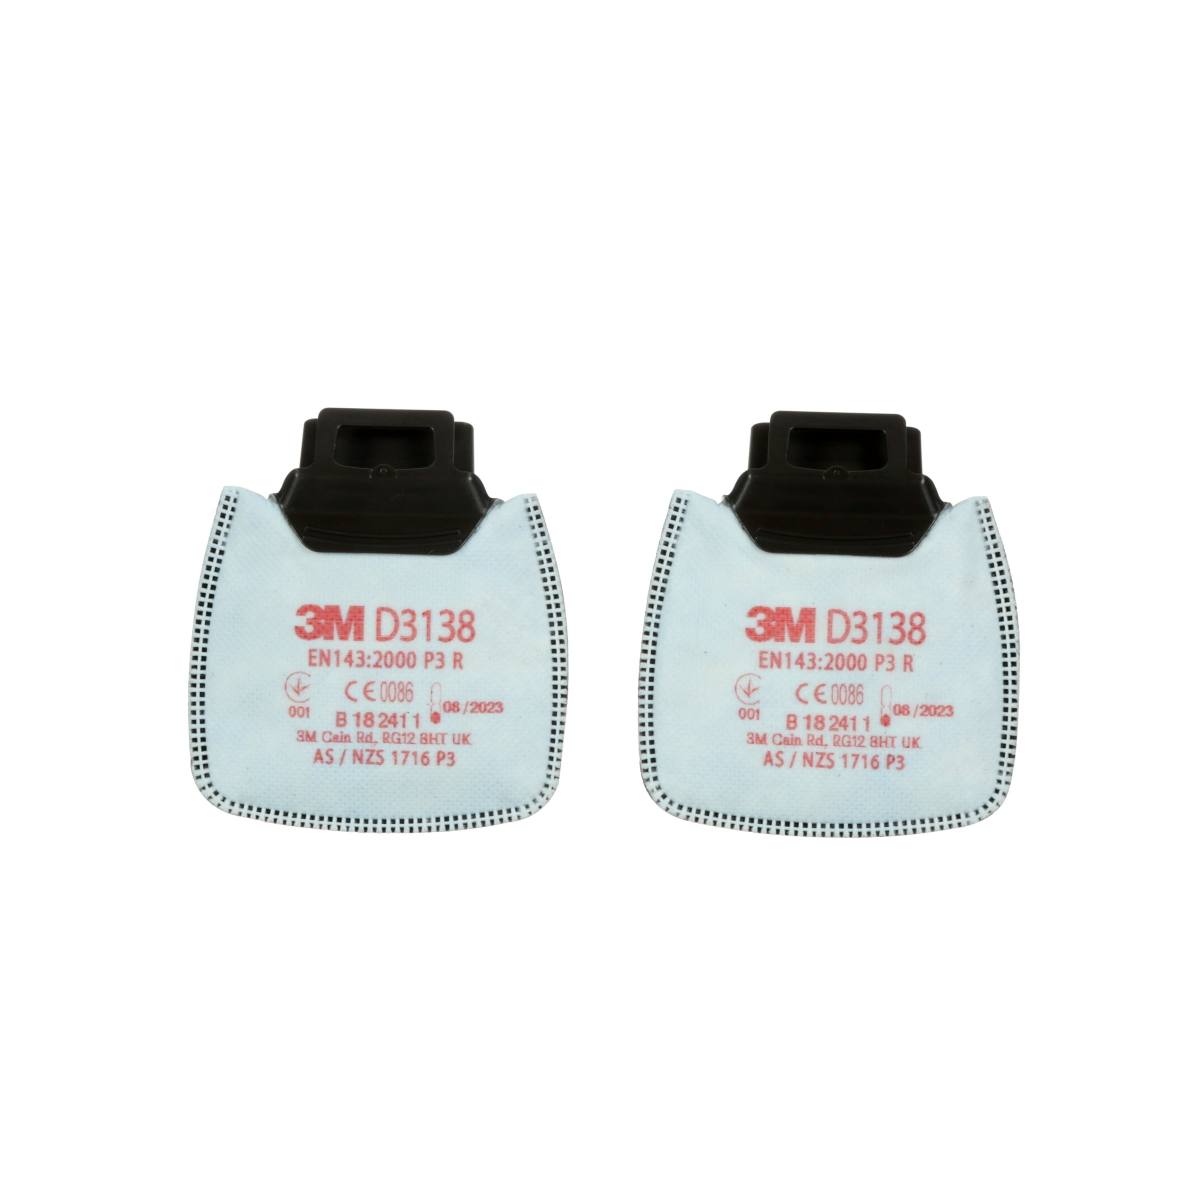 3M Secure Click D3138, P3 R Particle filter with activated carbon with additional protection against organic gases and vapours below the limit value and ozone up to 10 times the limit value. Ideal for welding